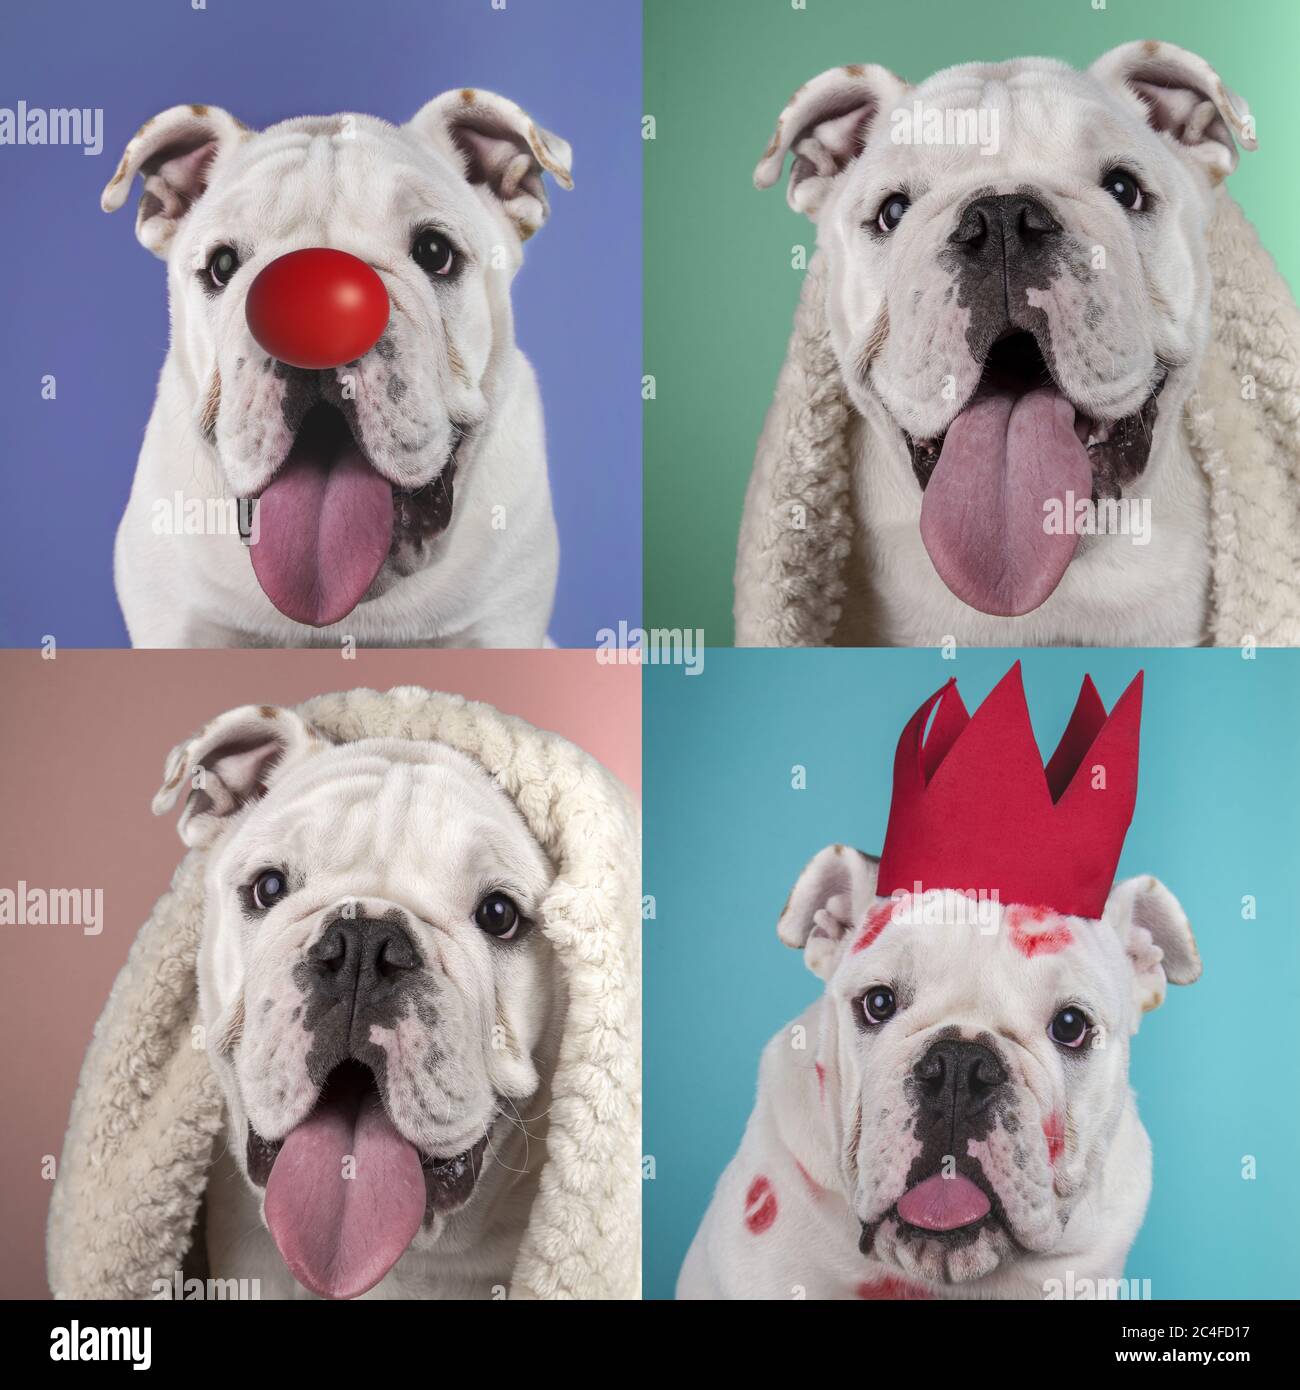 Collage of a funny English bulldog puppy portraits with various background colors Stock Photo